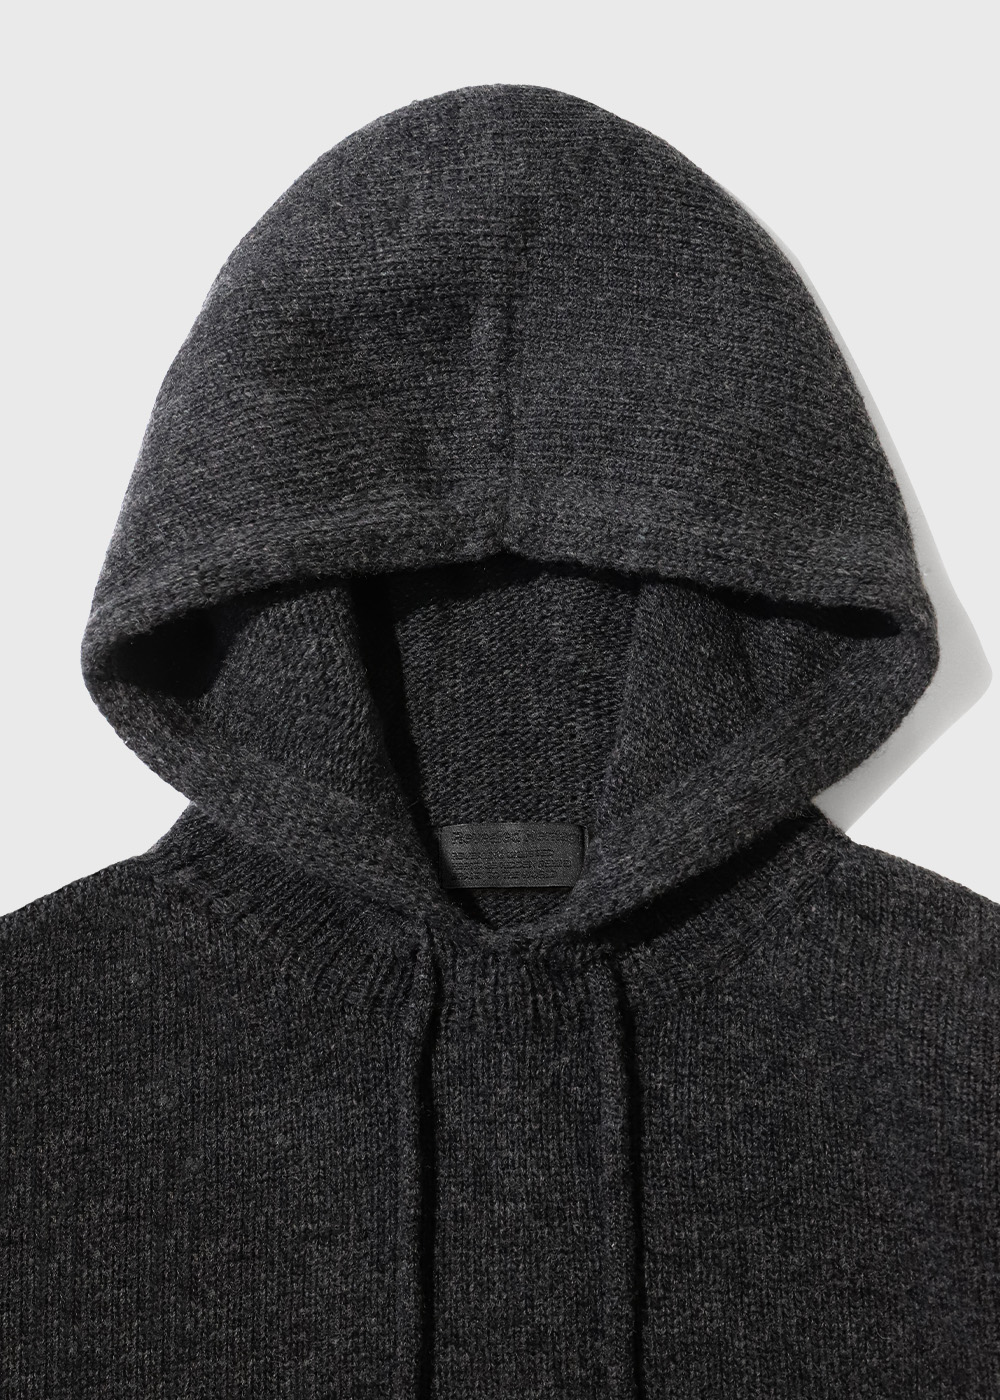 Whole Garment Hoodie Knit _ charcoal